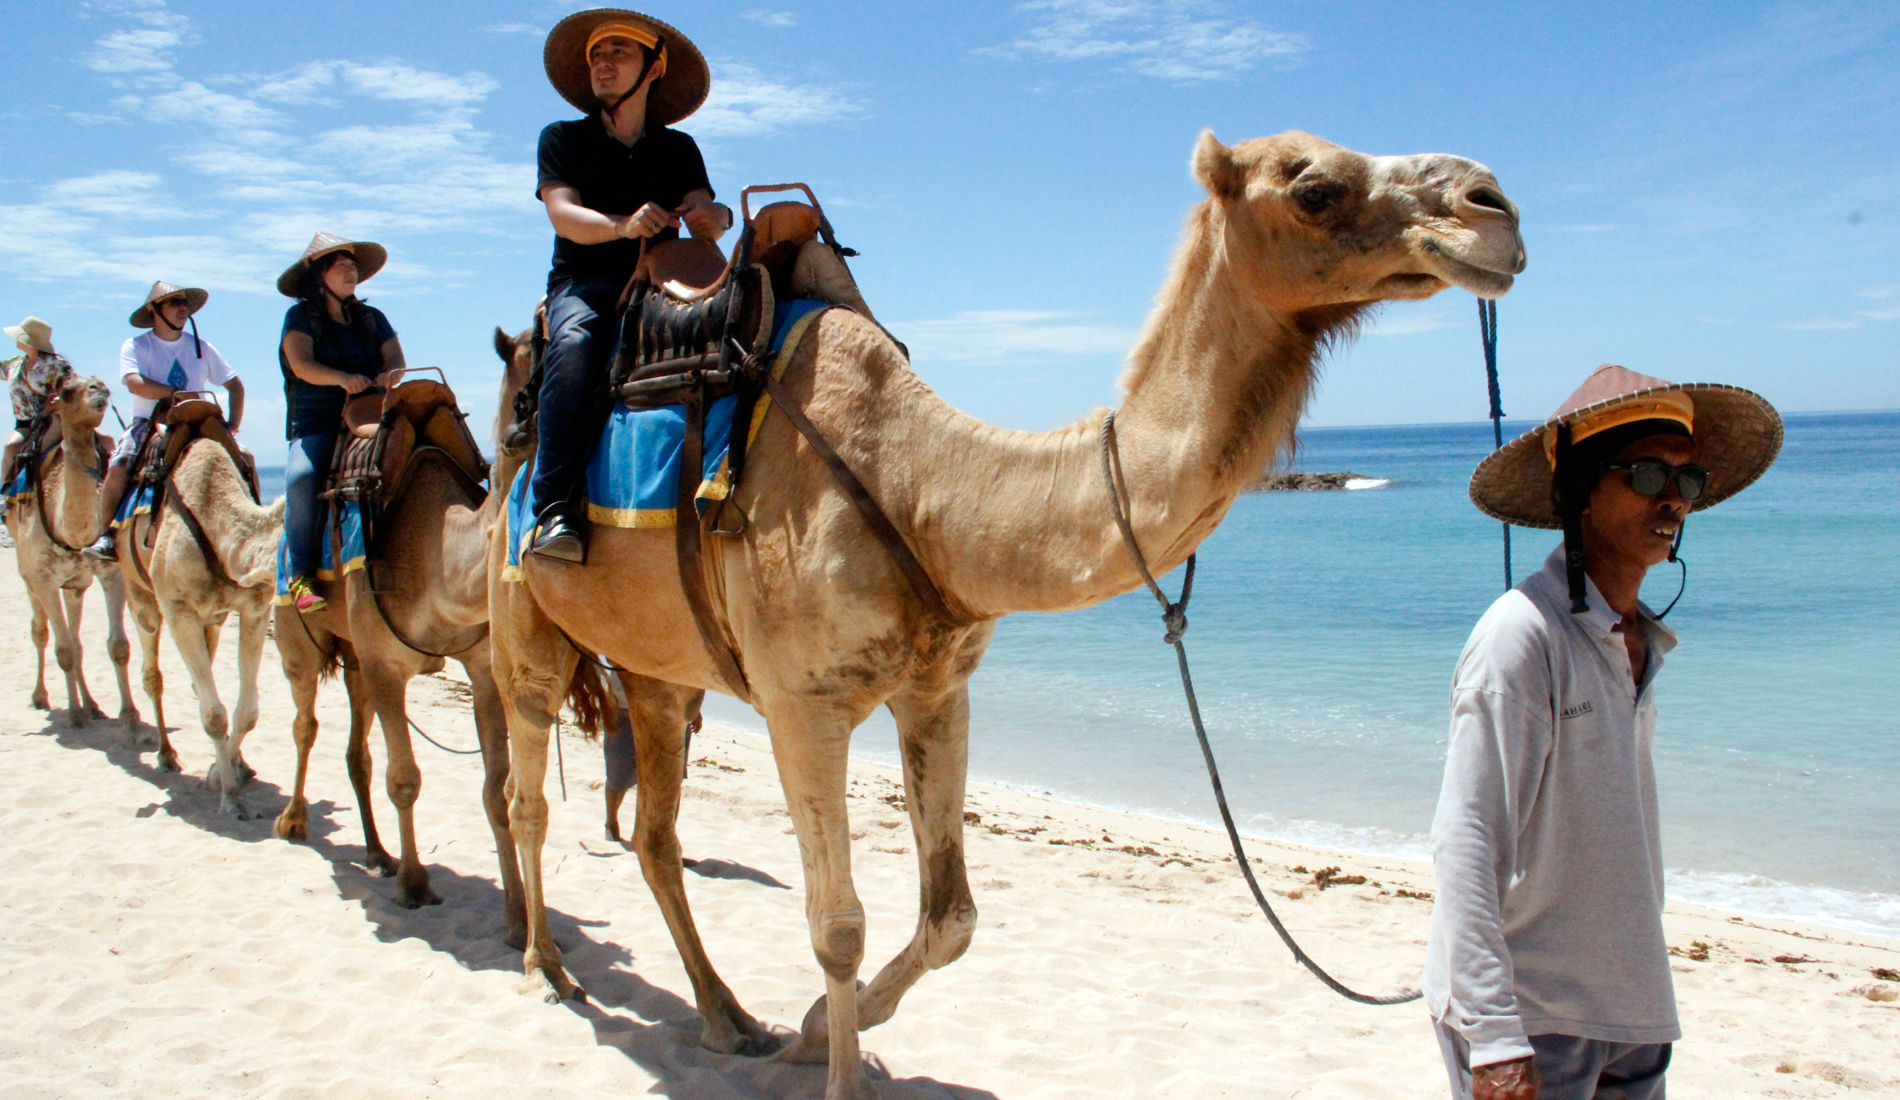 Bali Camel Tour - Bali Private Transport and Tour in Bali